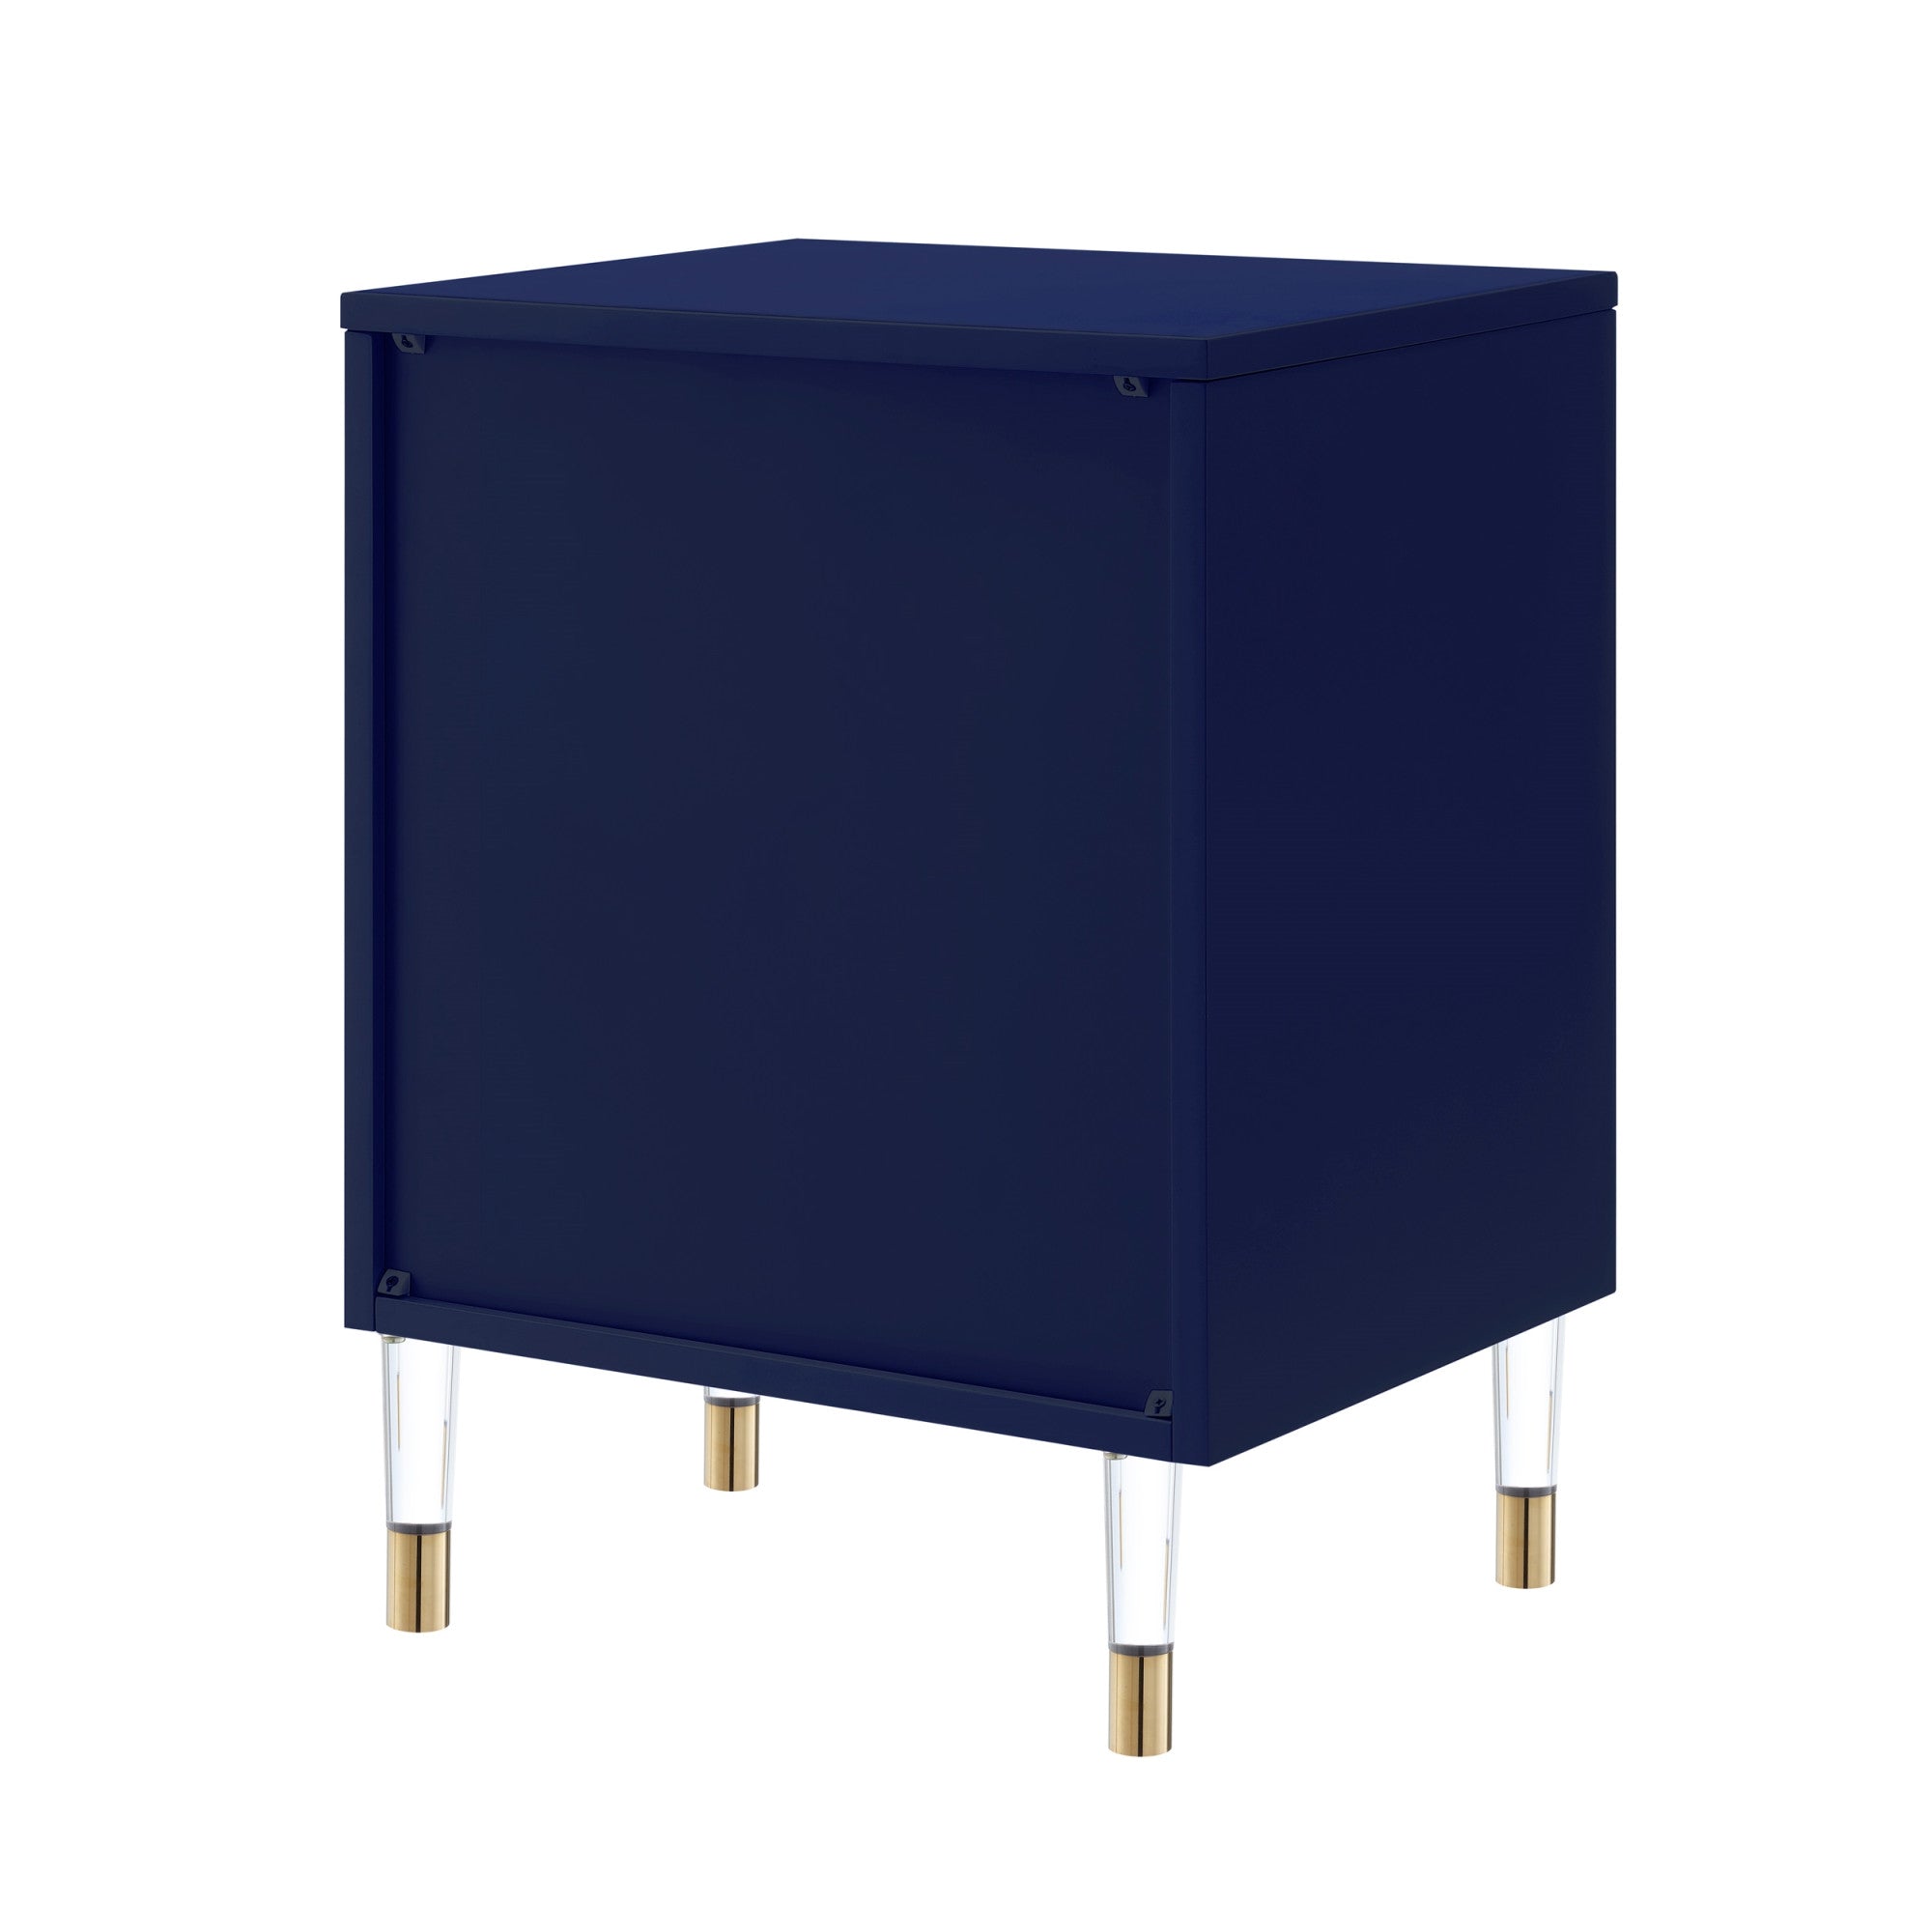 26" Clear and Dark Blue End Table with Drawer and shelf